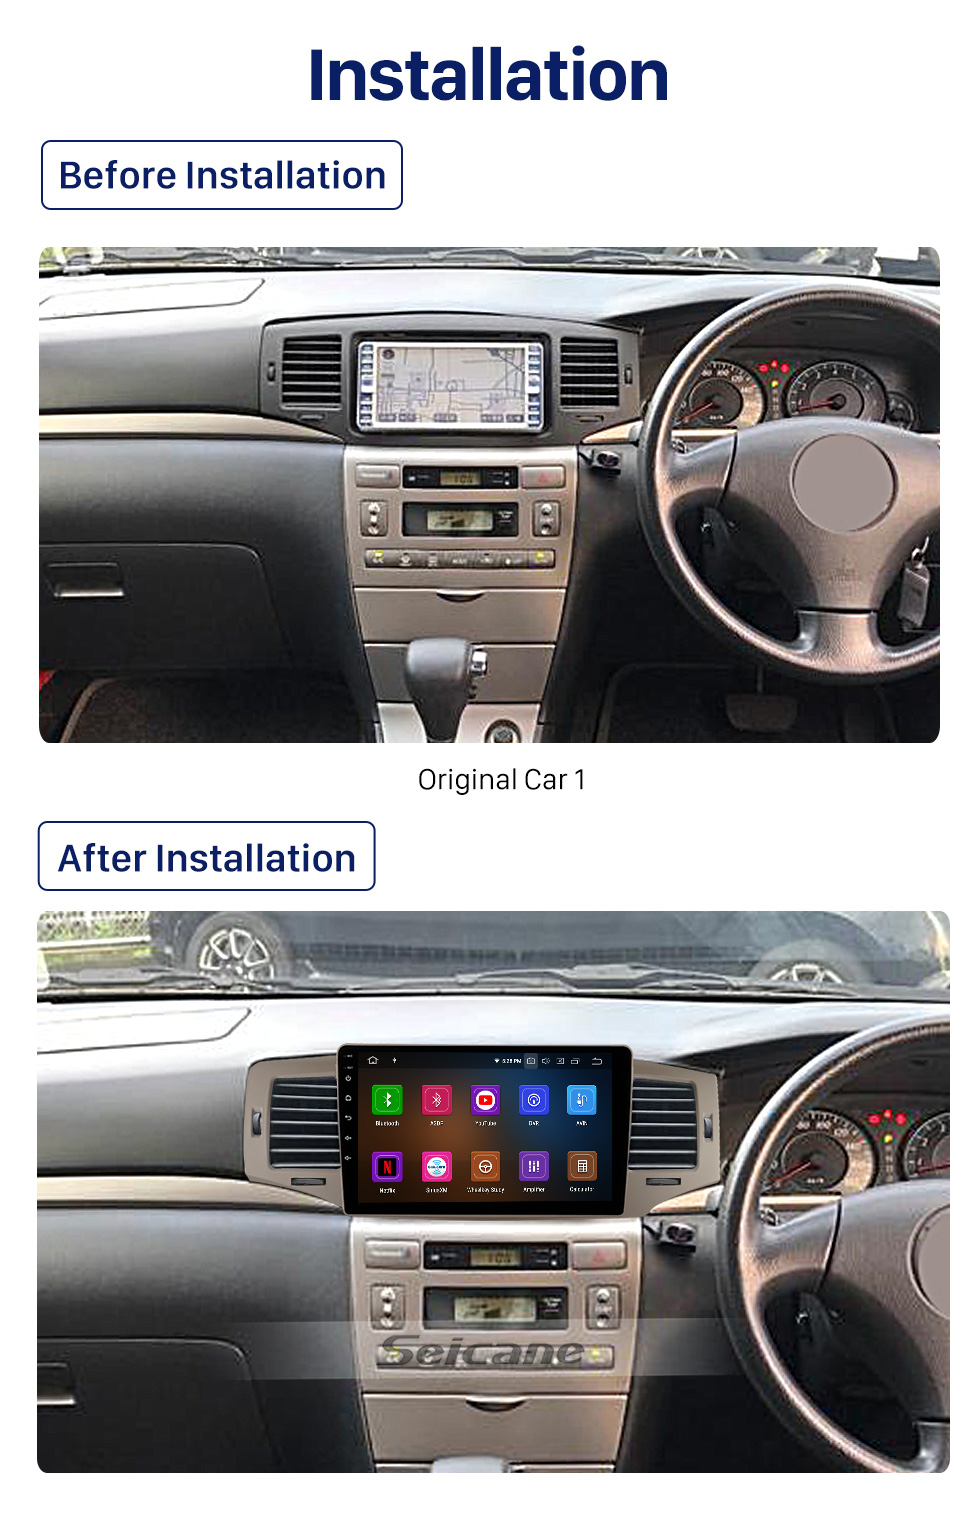 Details about   9" Android 9.1 Quad-core Stereo FM Radio GPS WIFI 3G/4G For Toyota Corolla 06-12 